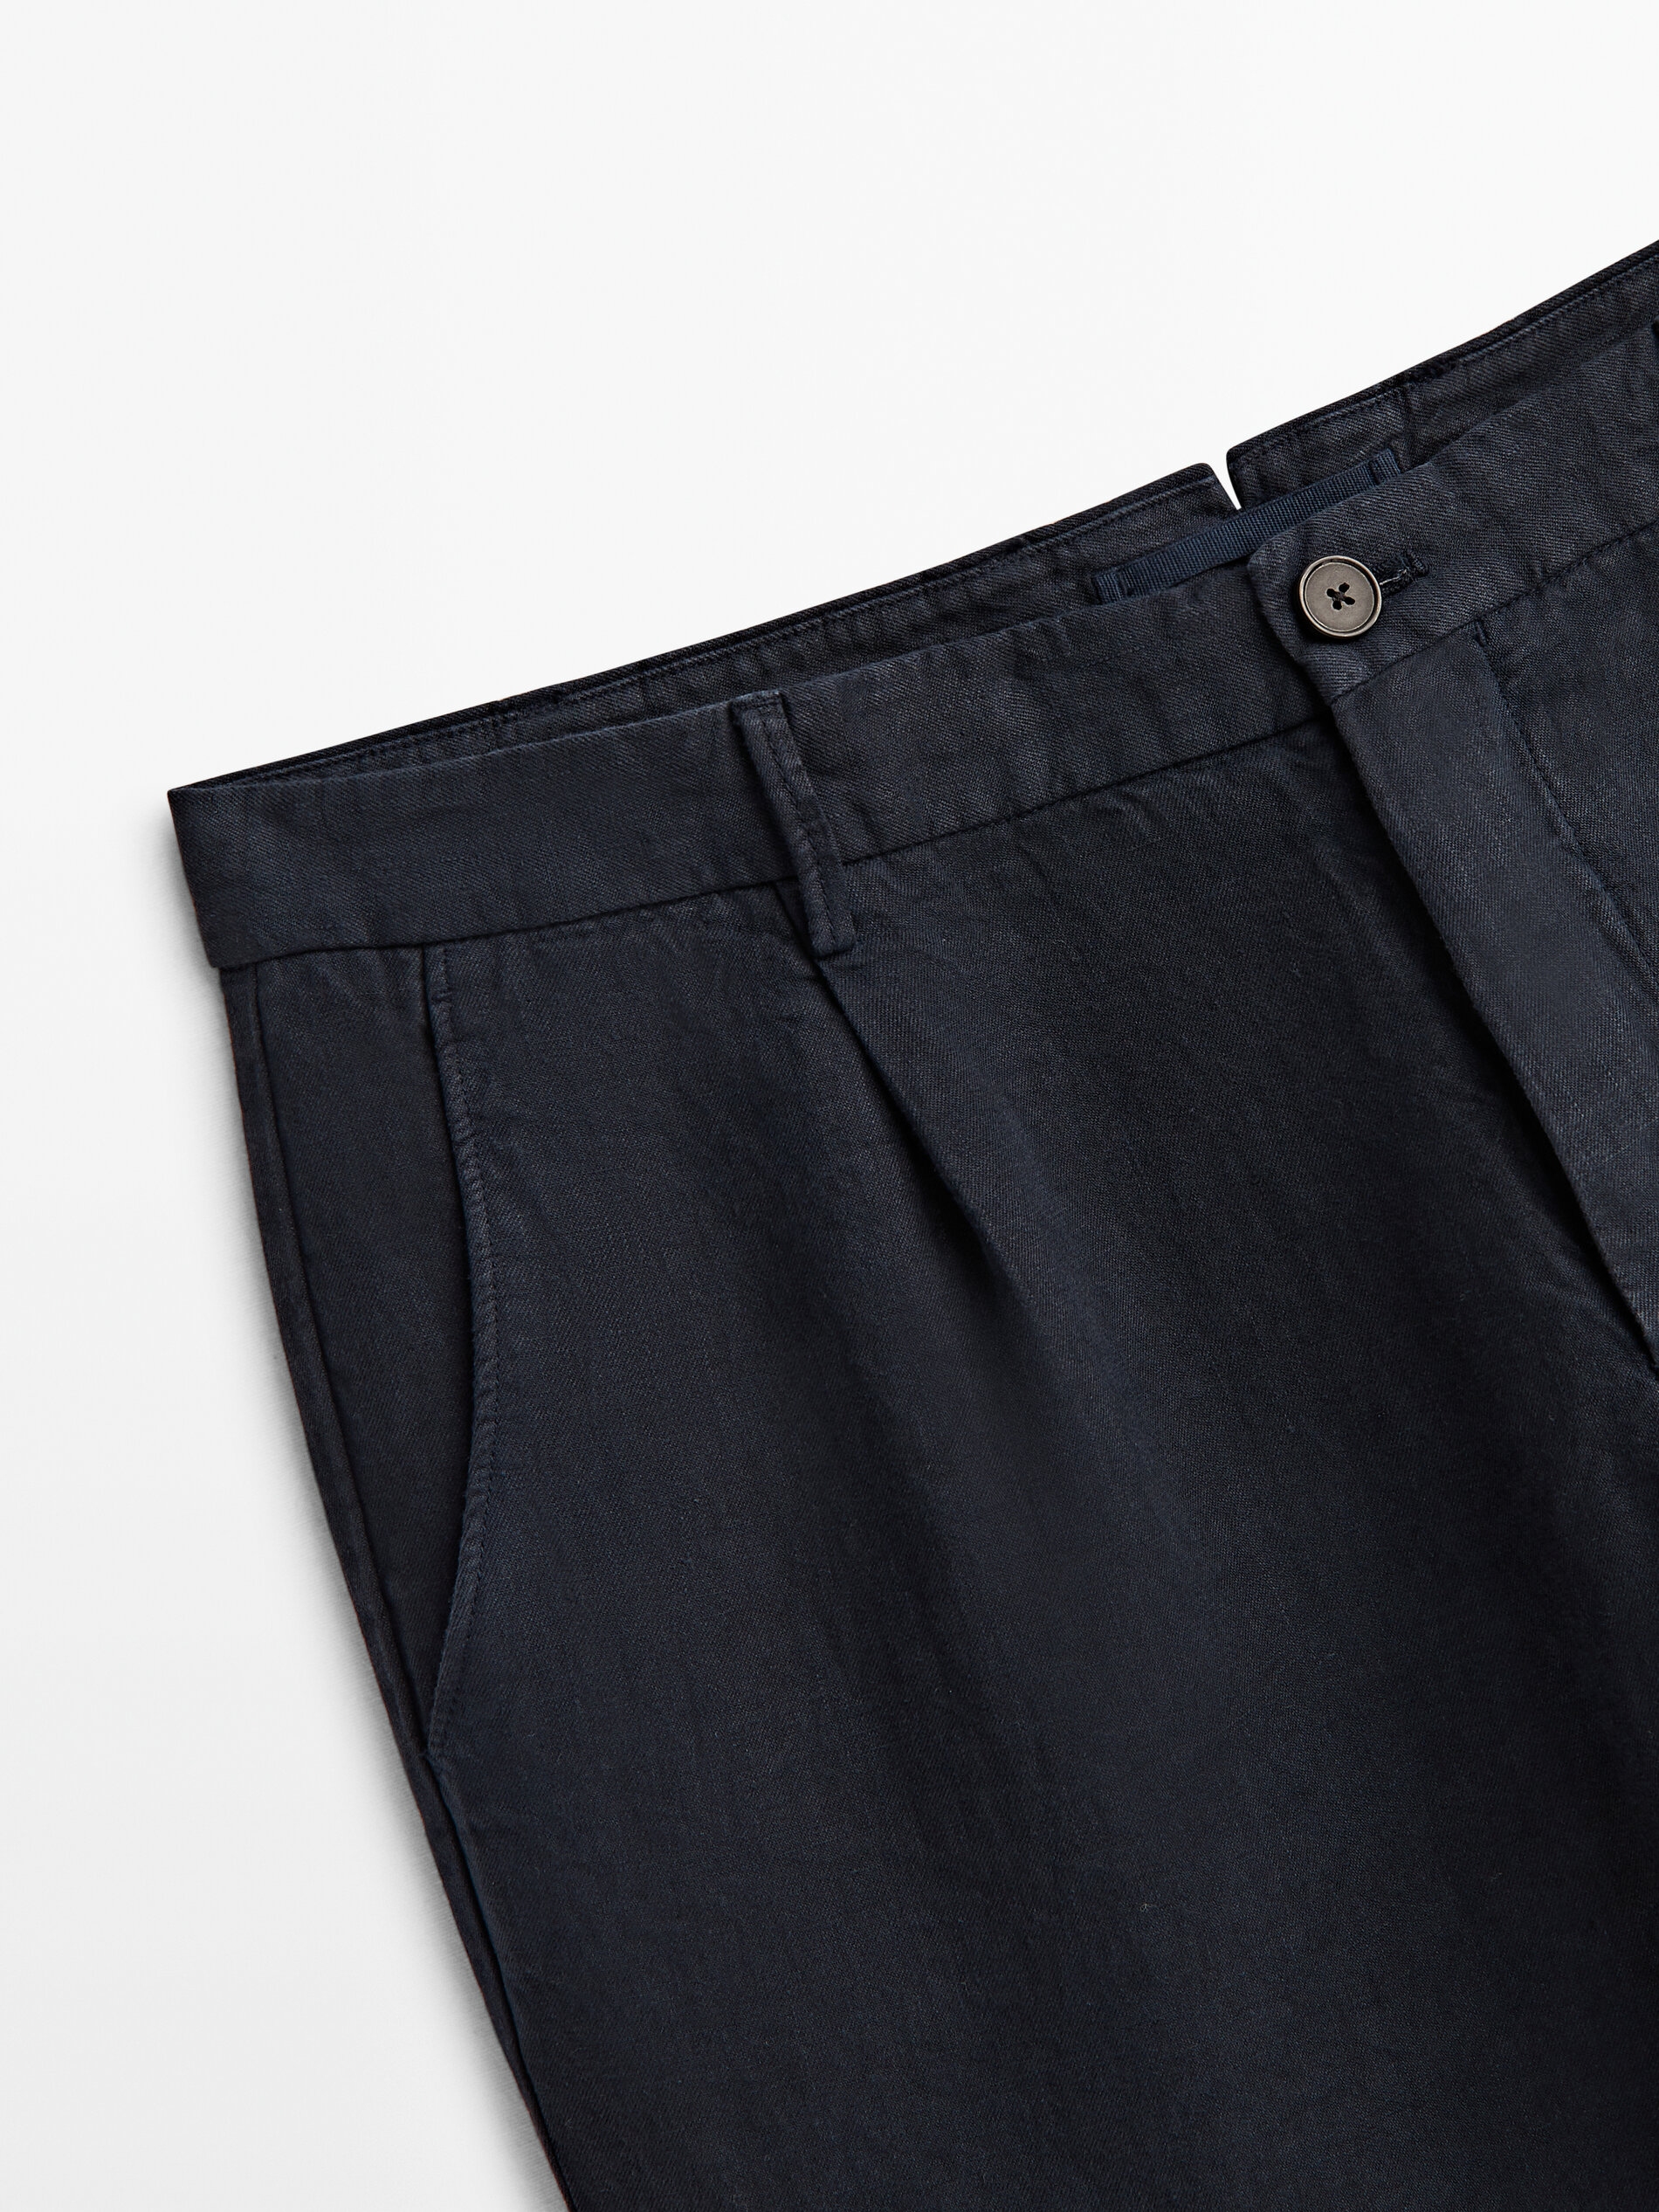 Details 71+ navy blue linen trousers latest - in.cdgdbentre